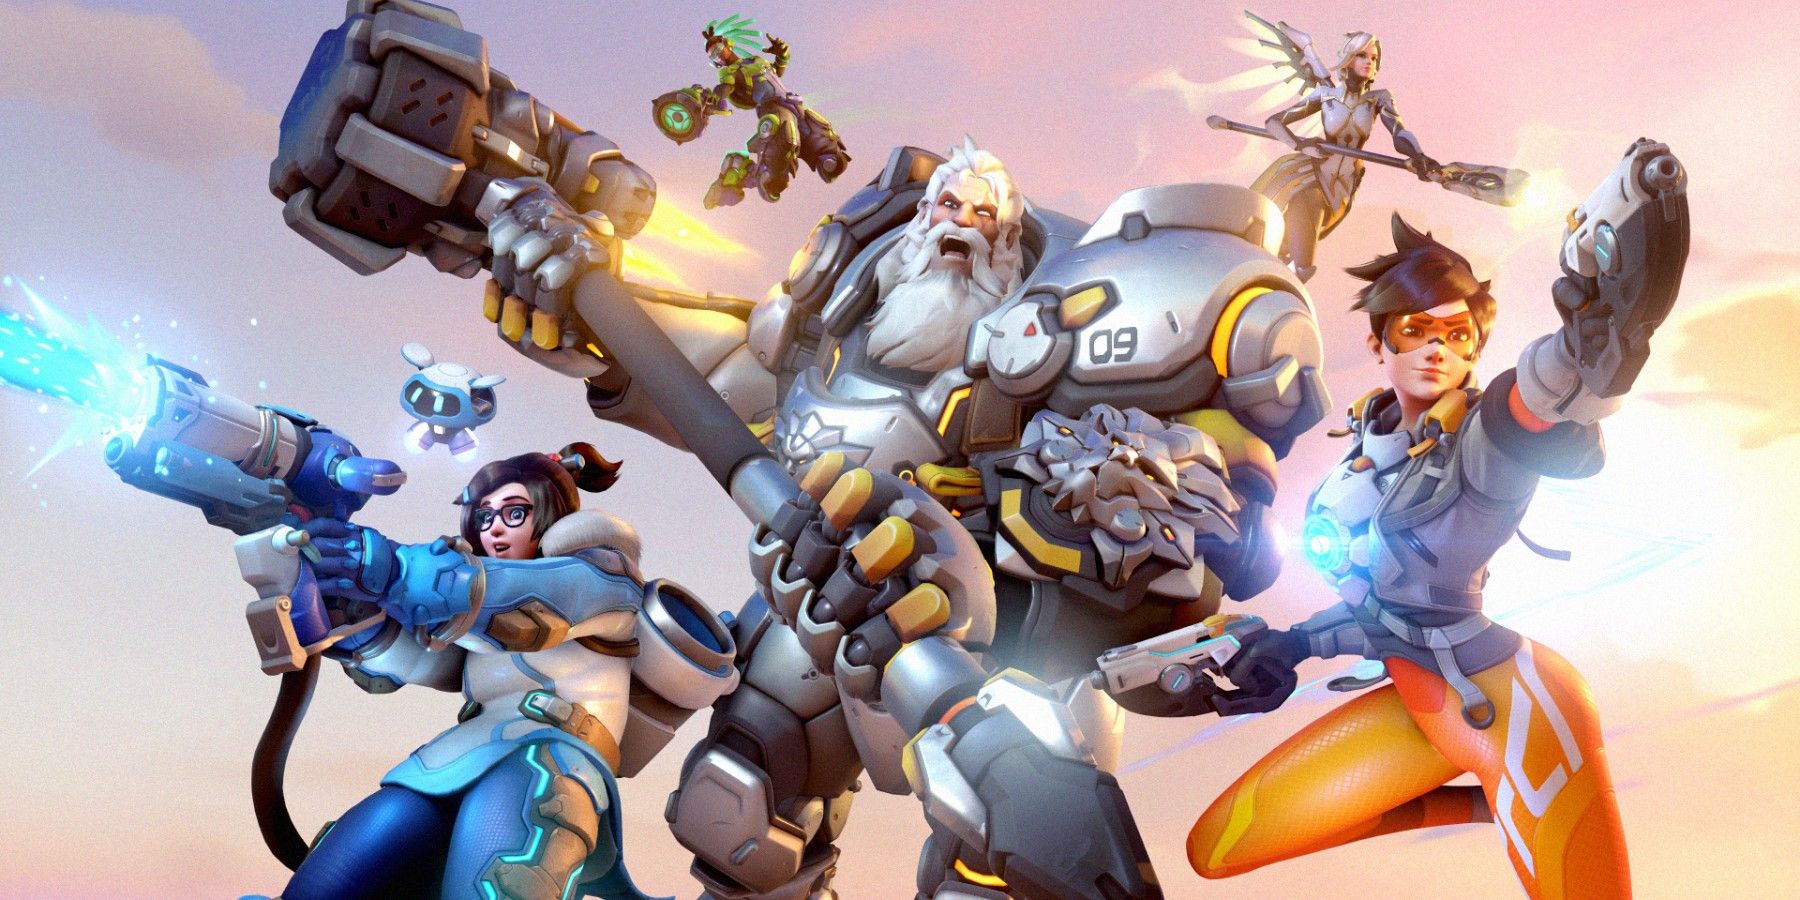 ow2 art with reinhardt, mei, tracer, lucio, and mercy